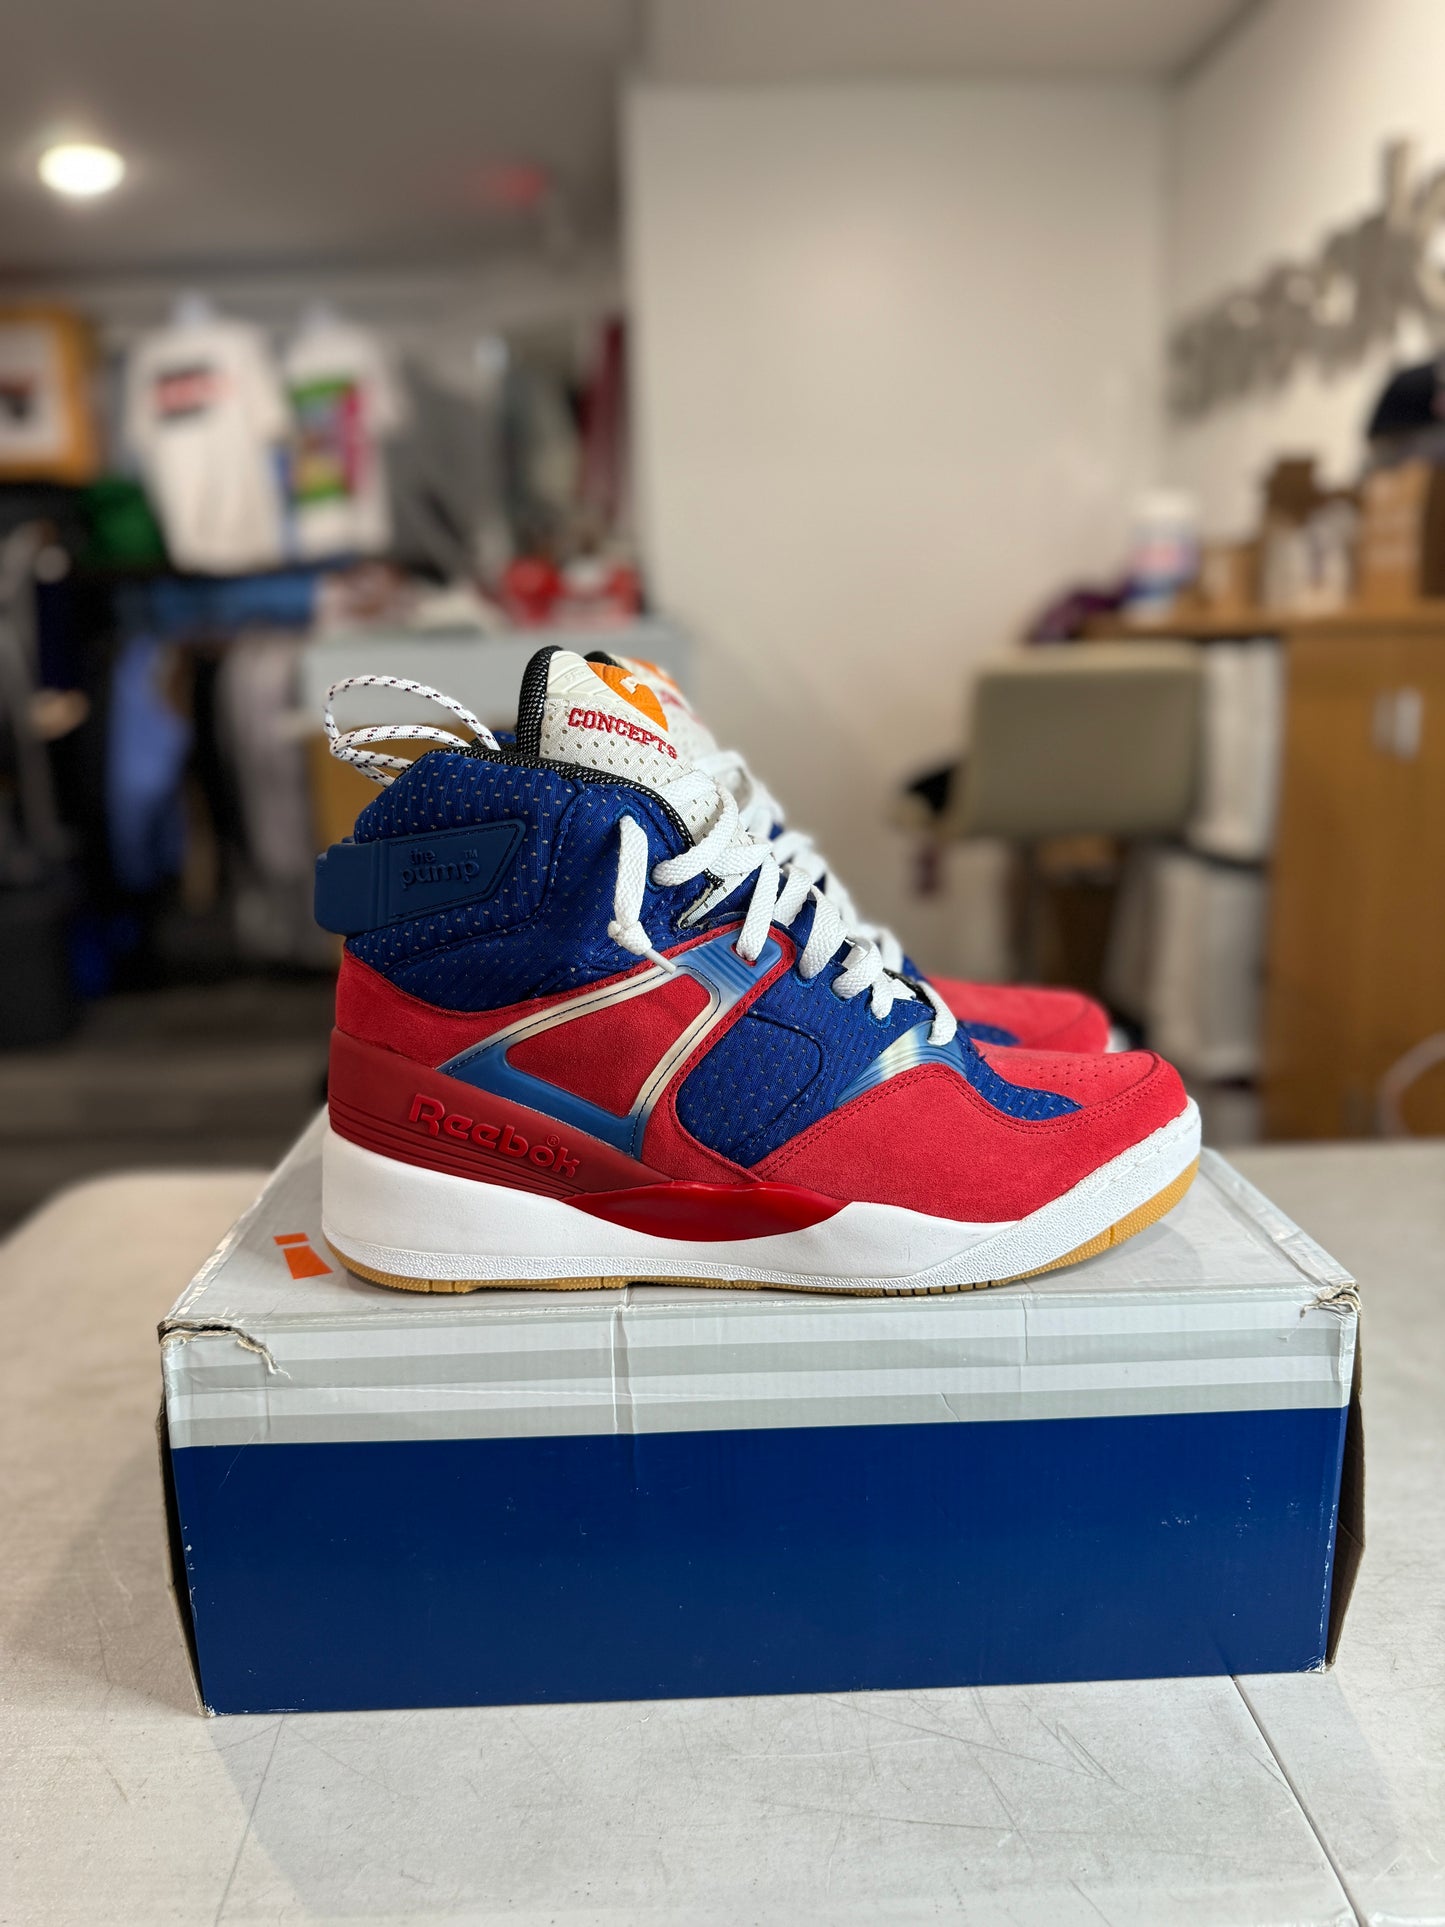 Concepts x The Pump Certified M44303 USED